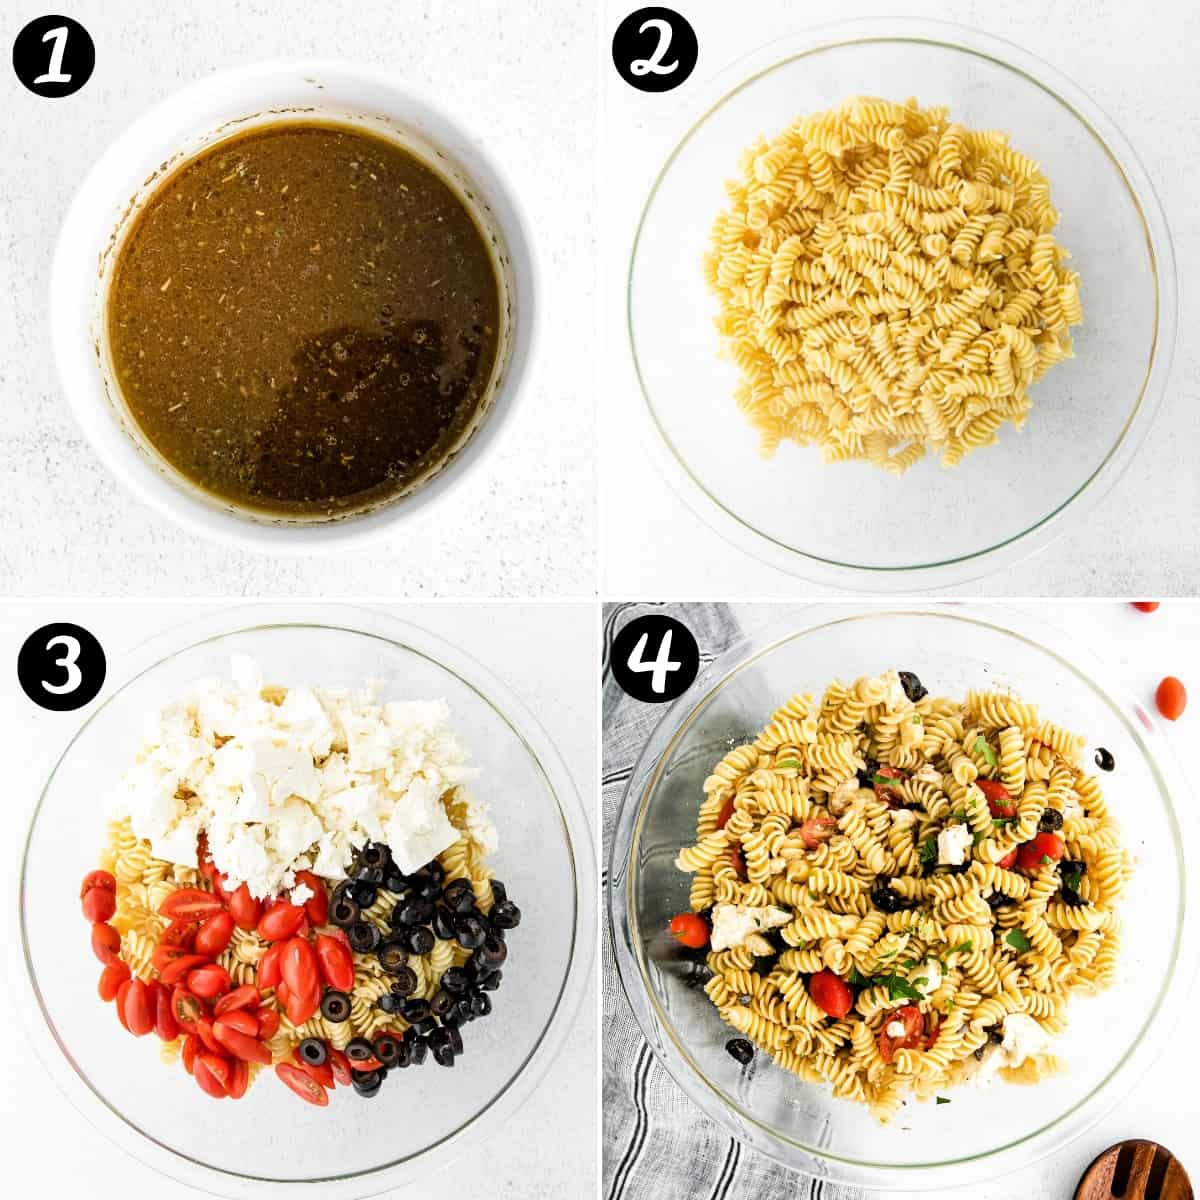 4 image collage: top left - vinaigrette dressing in white bowl; top right - cooked and drained rotini in glass bowl; bottom left - pasta, dressing, feta, sliced olives, and cherry tomatoes unmixed in glass bowl; bottom right - all ingredients mixed in glass bowl